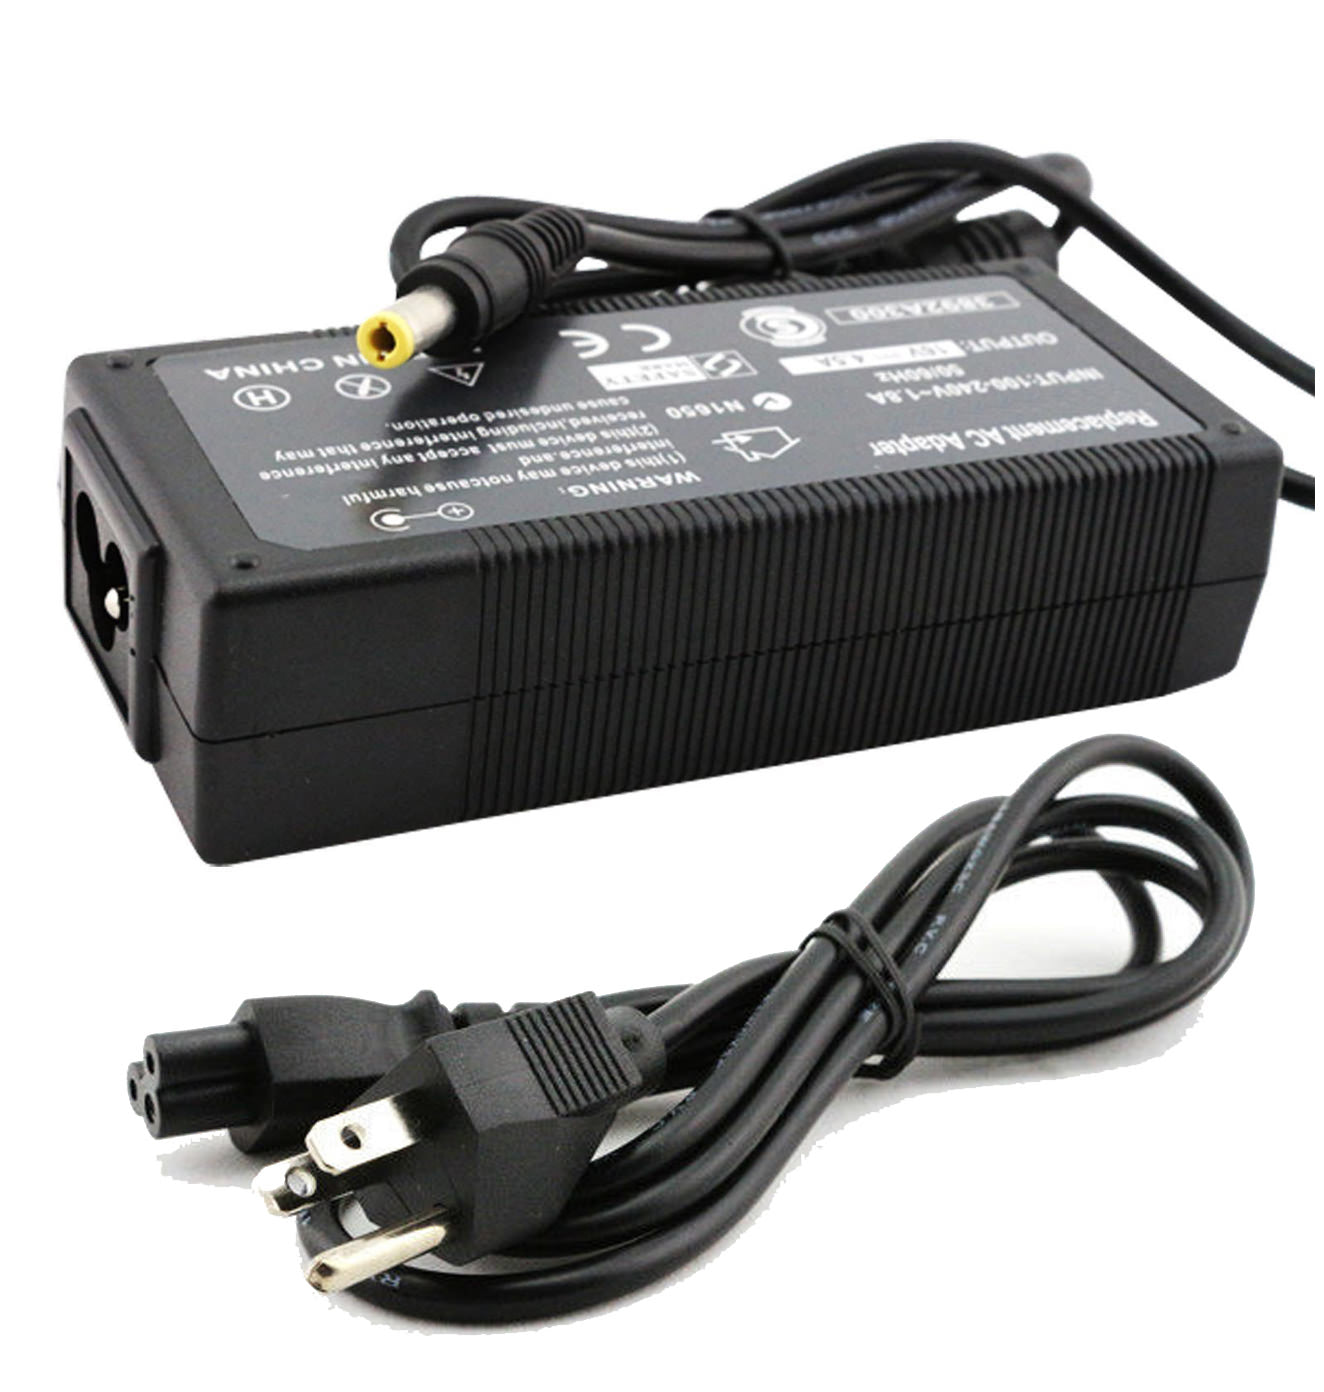 AC Adapter Charger for Panasonic Toughbook CF-R6 Notebook.